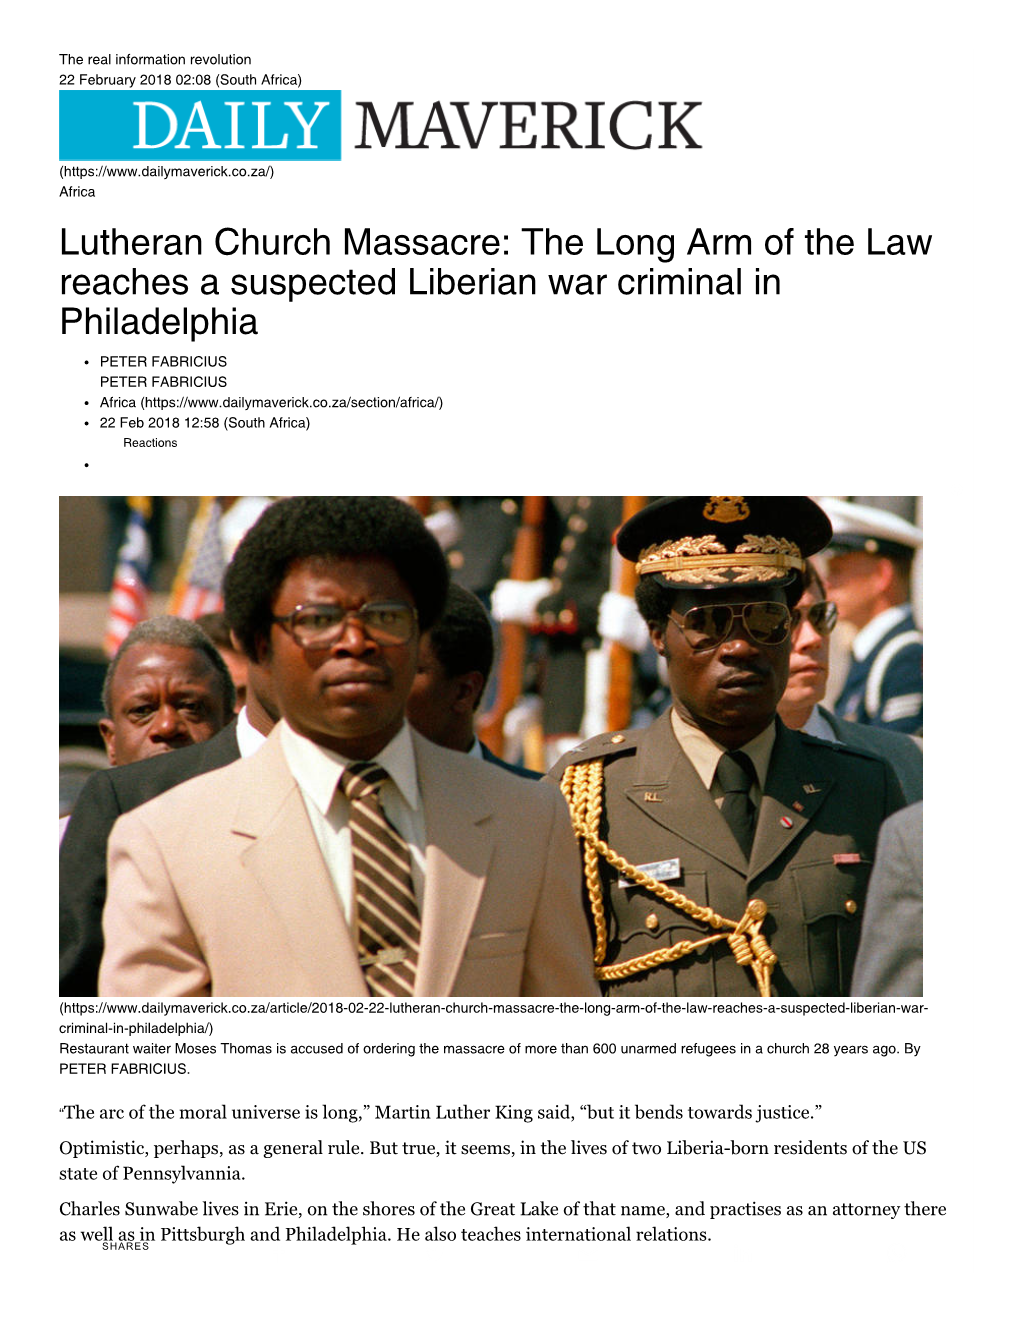 Lutheran Church Massacre: the Long Arm of the Law Reaches a Suspected Liberian War Criminal in Philadelphia